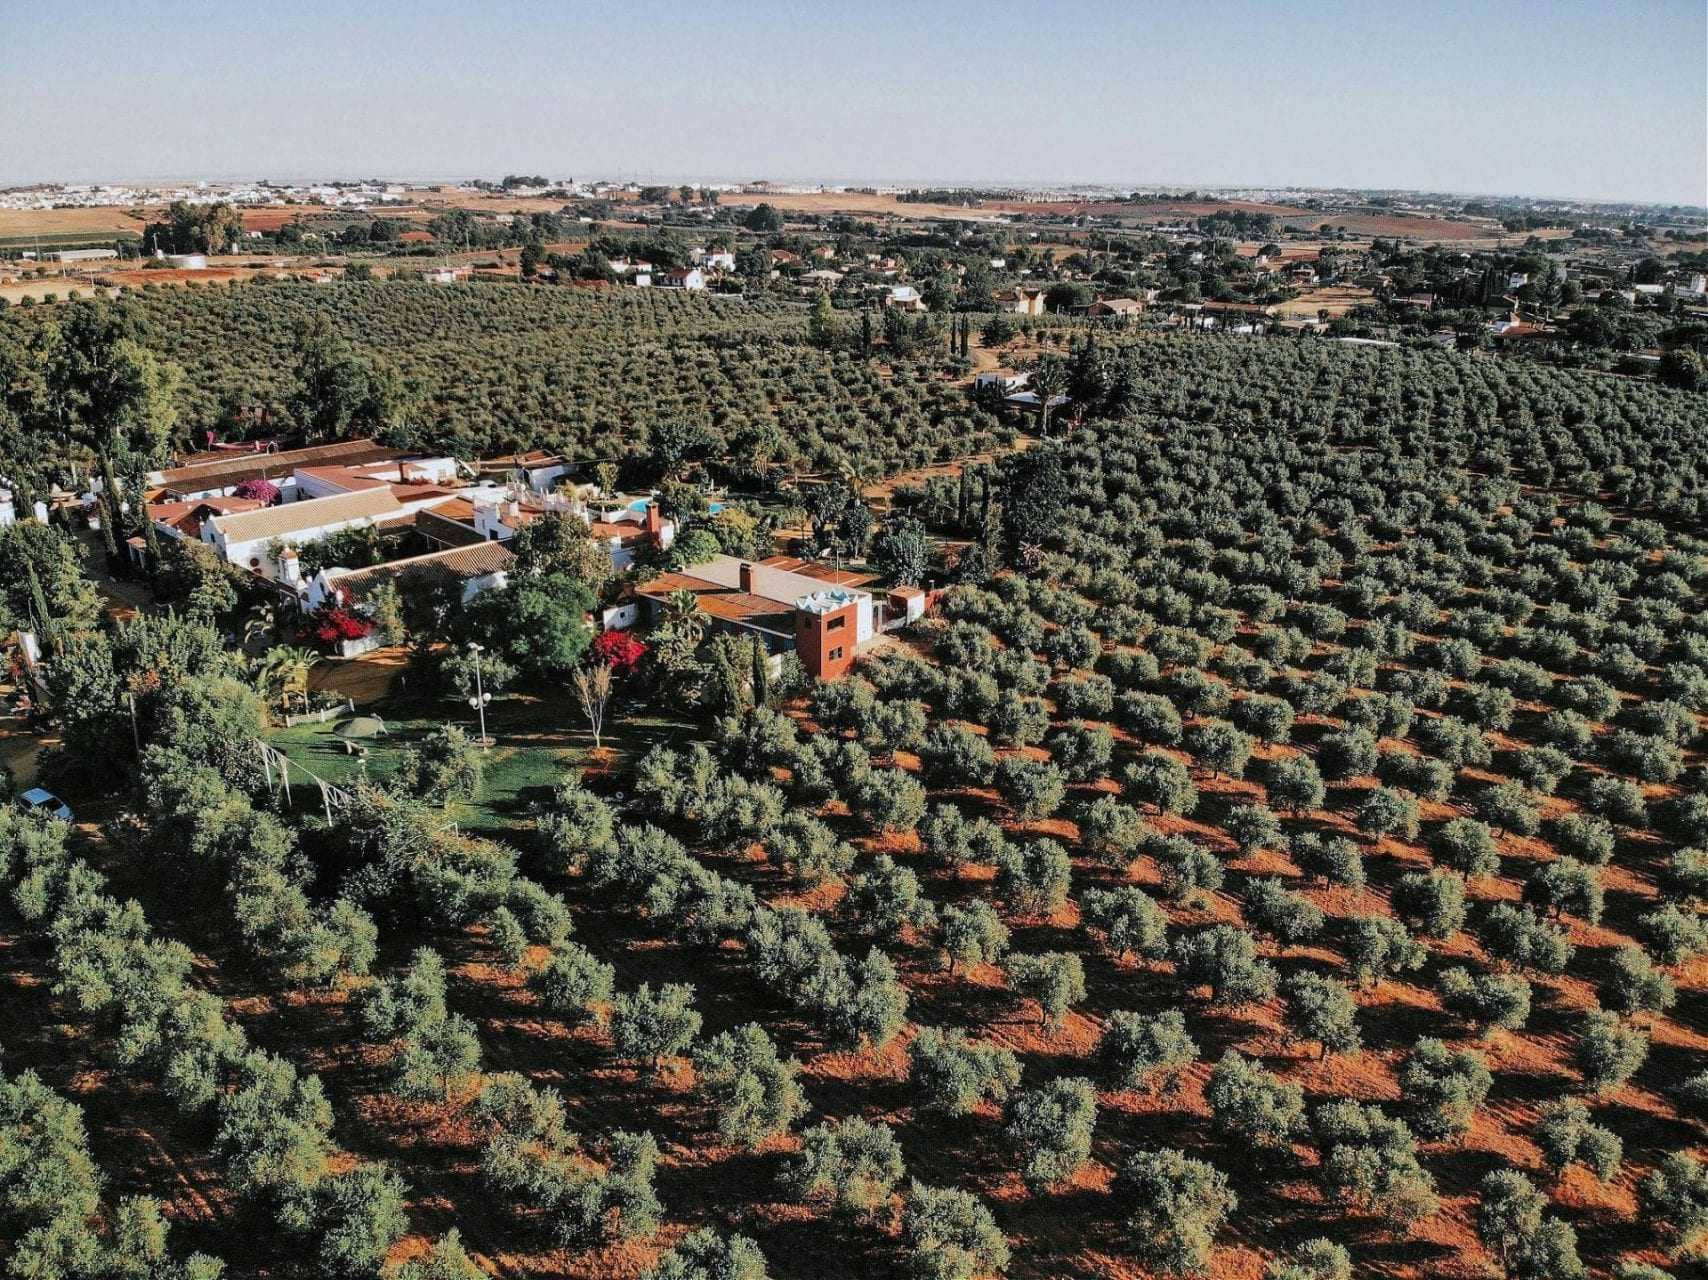 production-mondiale-business-climat-and-covid-inquiet-farmers-preparing-for-harvest-olive-oil-times